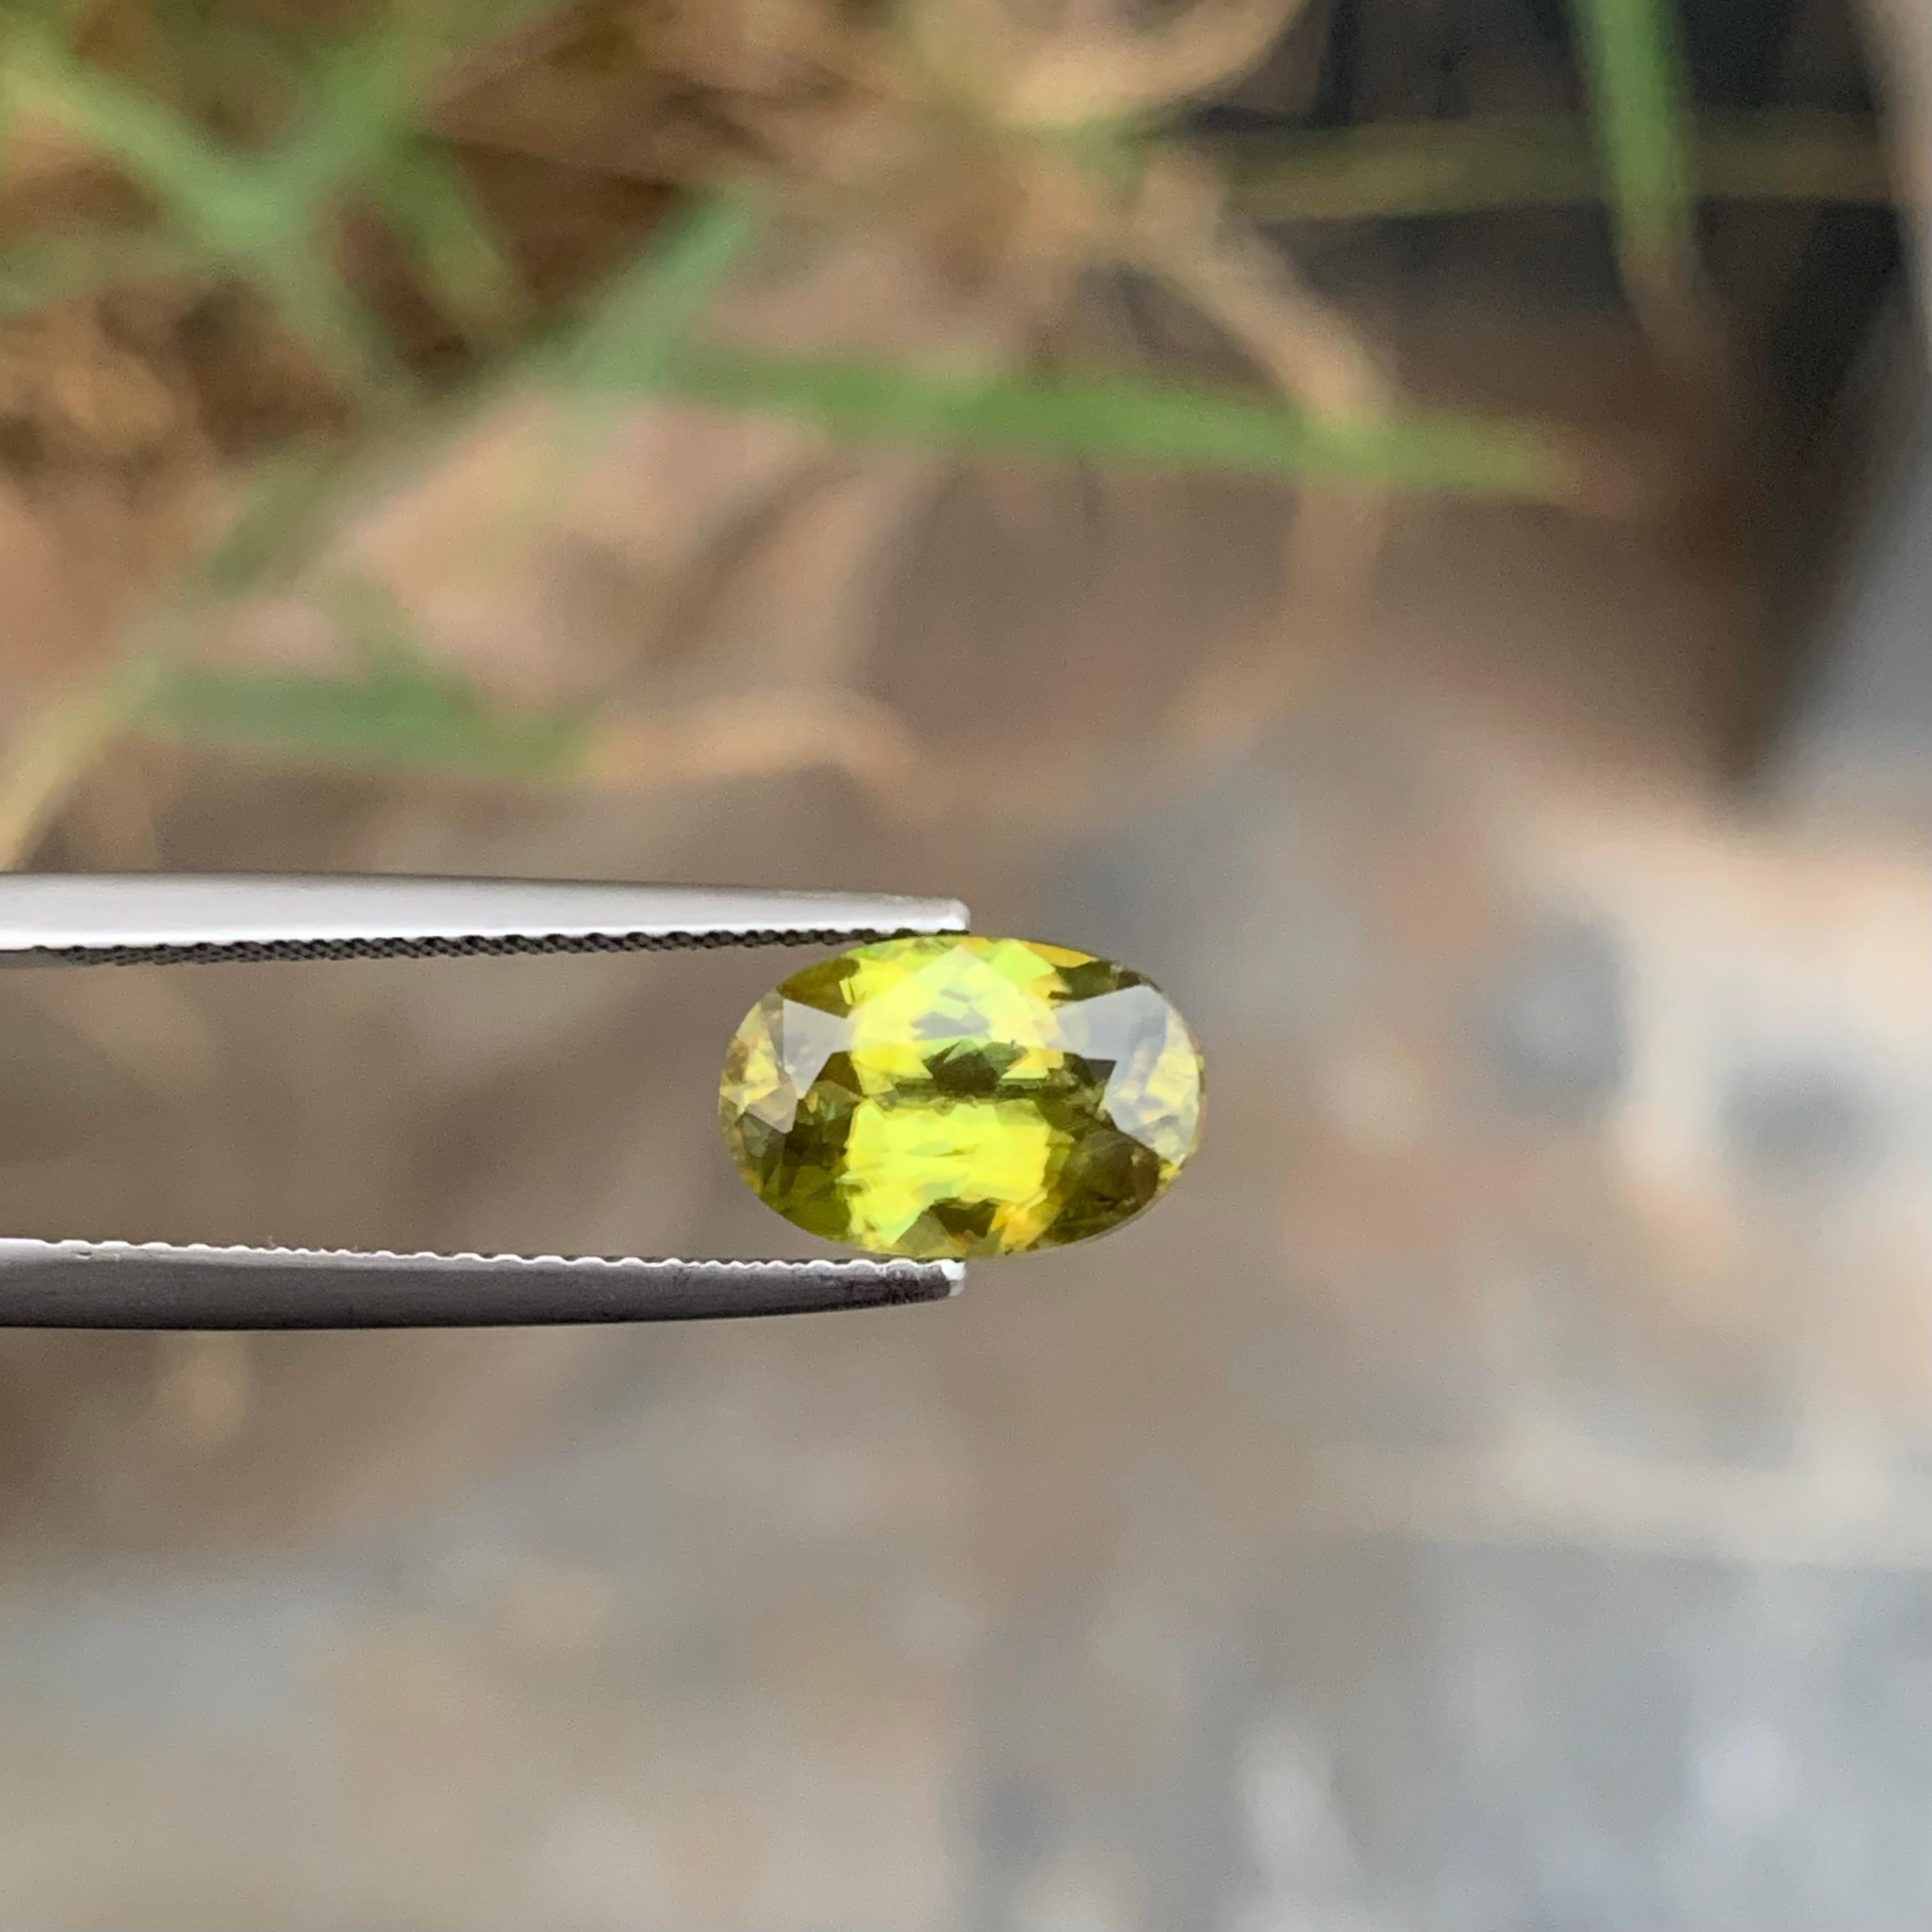 Faceted Sphene
Weight: 10.5x7.2x5.1 Mm
Origin: Warsak Pakistan 
Color: Yellow 
Shape: Oval
Treatment: Non
Certficate: On Customer Demand 
Sphene, also known as titanite, is a mineral that is valued for both its aesthetic beauty and its potential